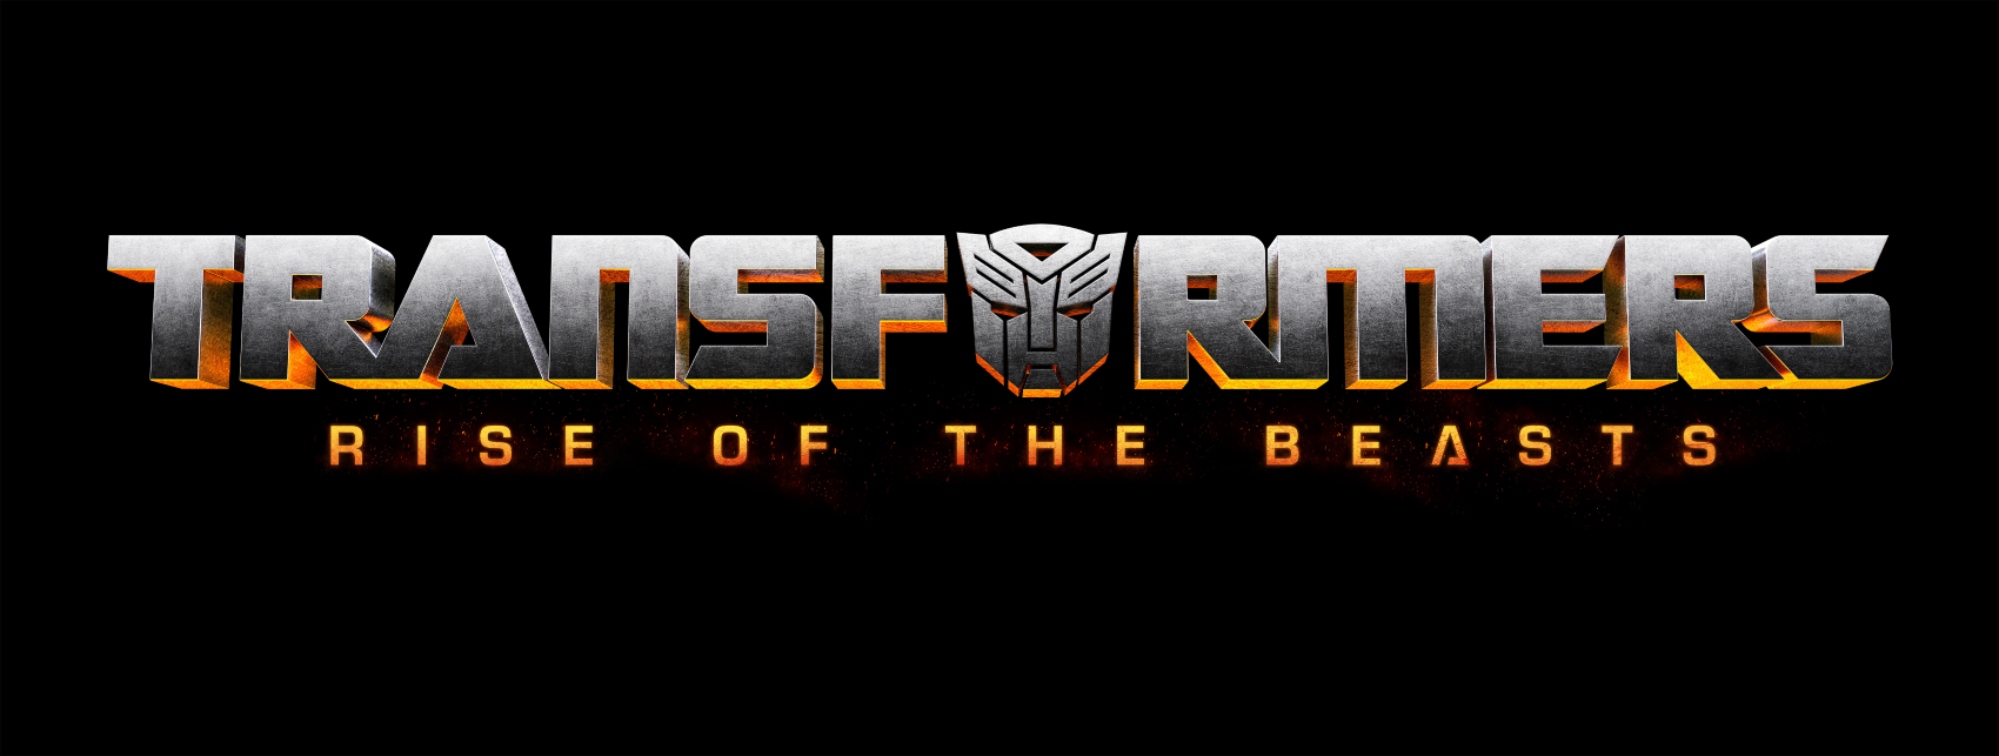 'Transformers: Rise of the Beasts' logo